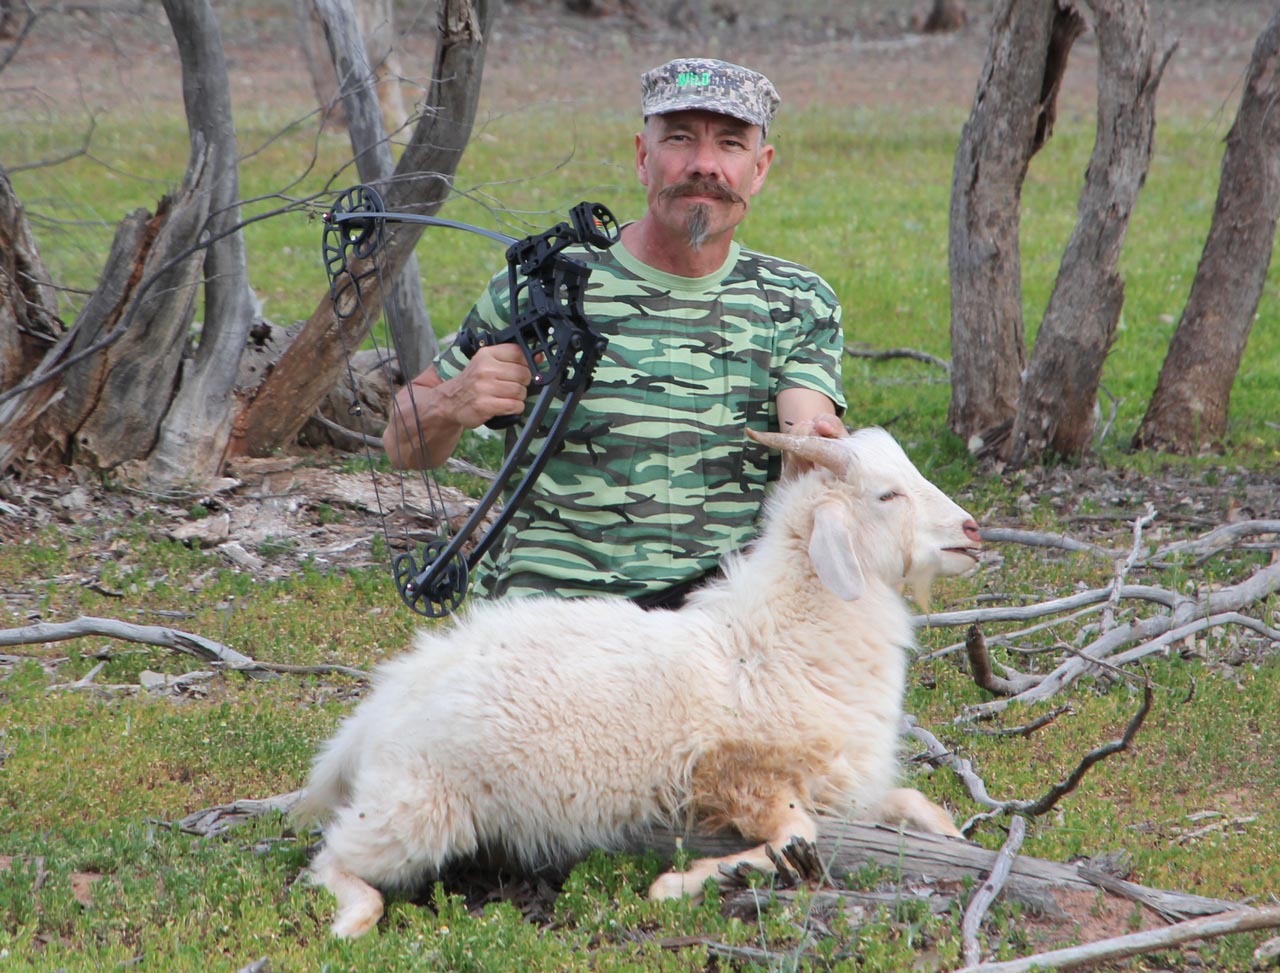 The SR Xtreme may be small, but it delivered a 100g broadhead-tipped arrow with full penetration on this midsized goat.